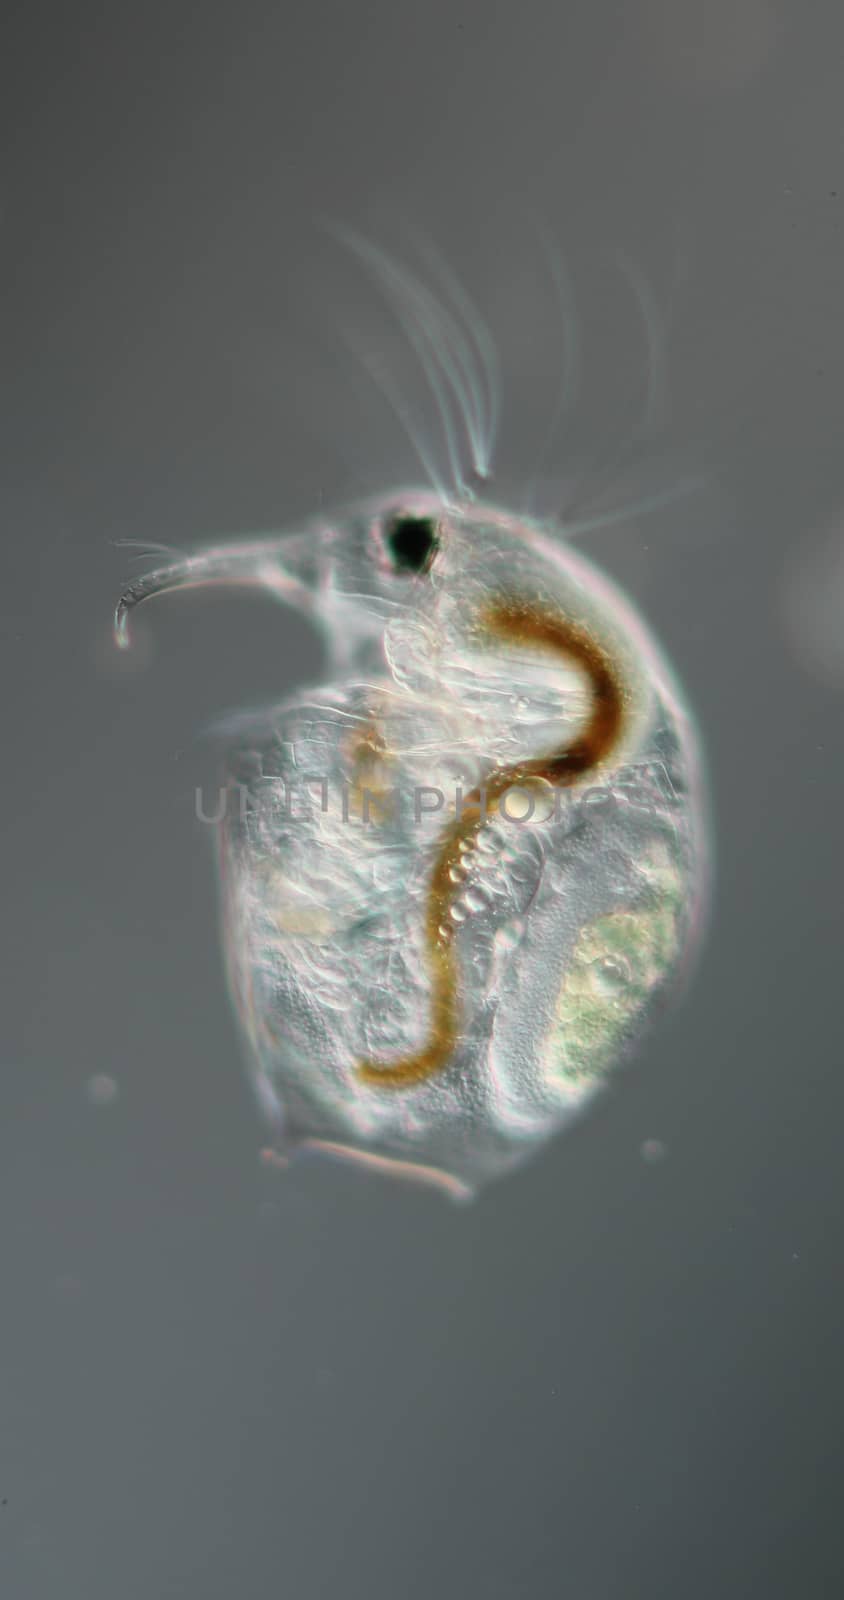 Water flea with embryo and antennae at high magnification in the water drop